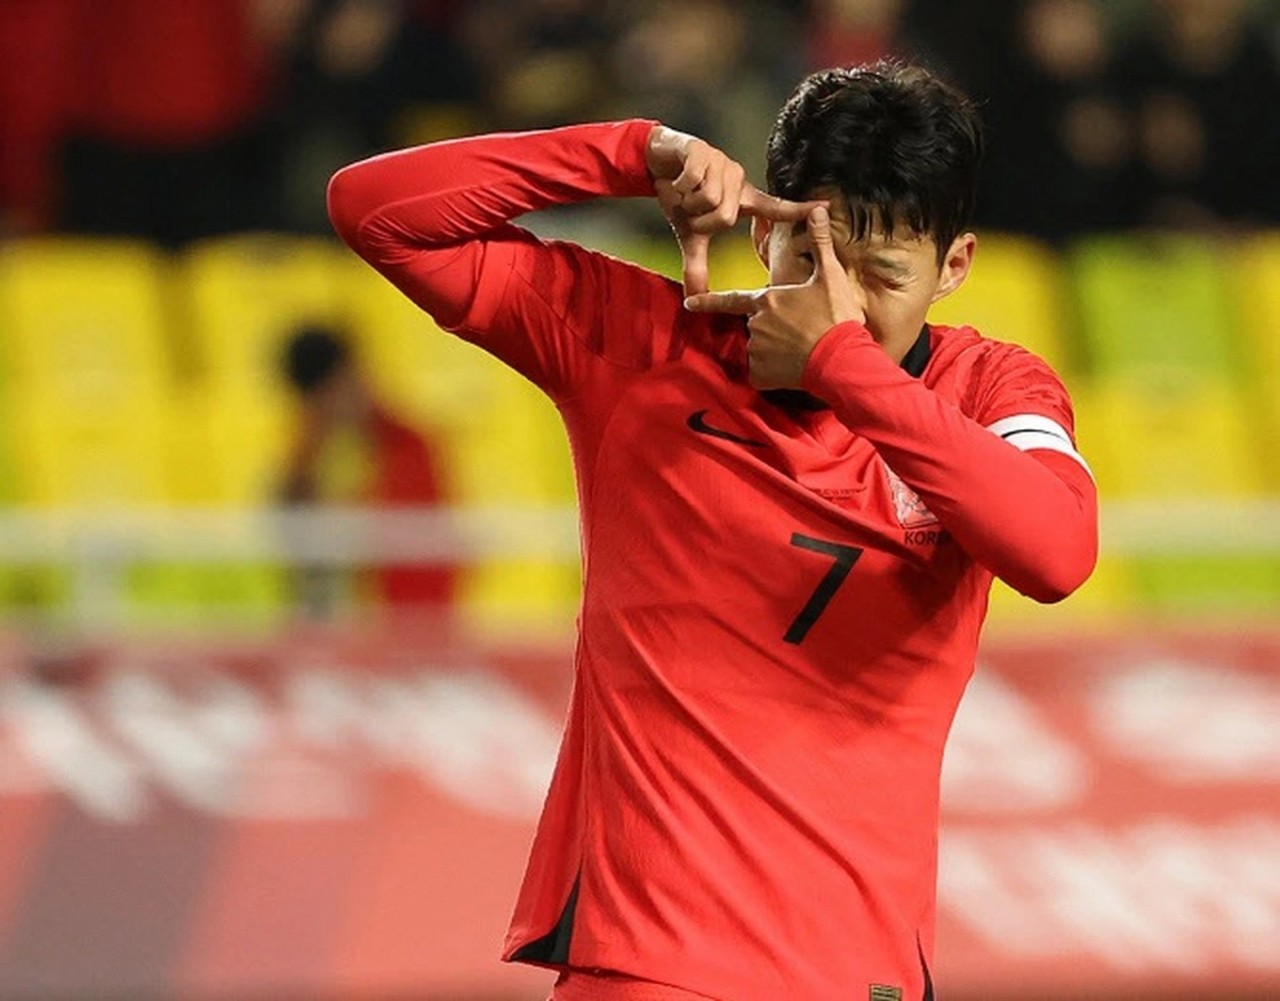 Son Heung Min Gives Credit to Teammates for Winning Against Vietnam